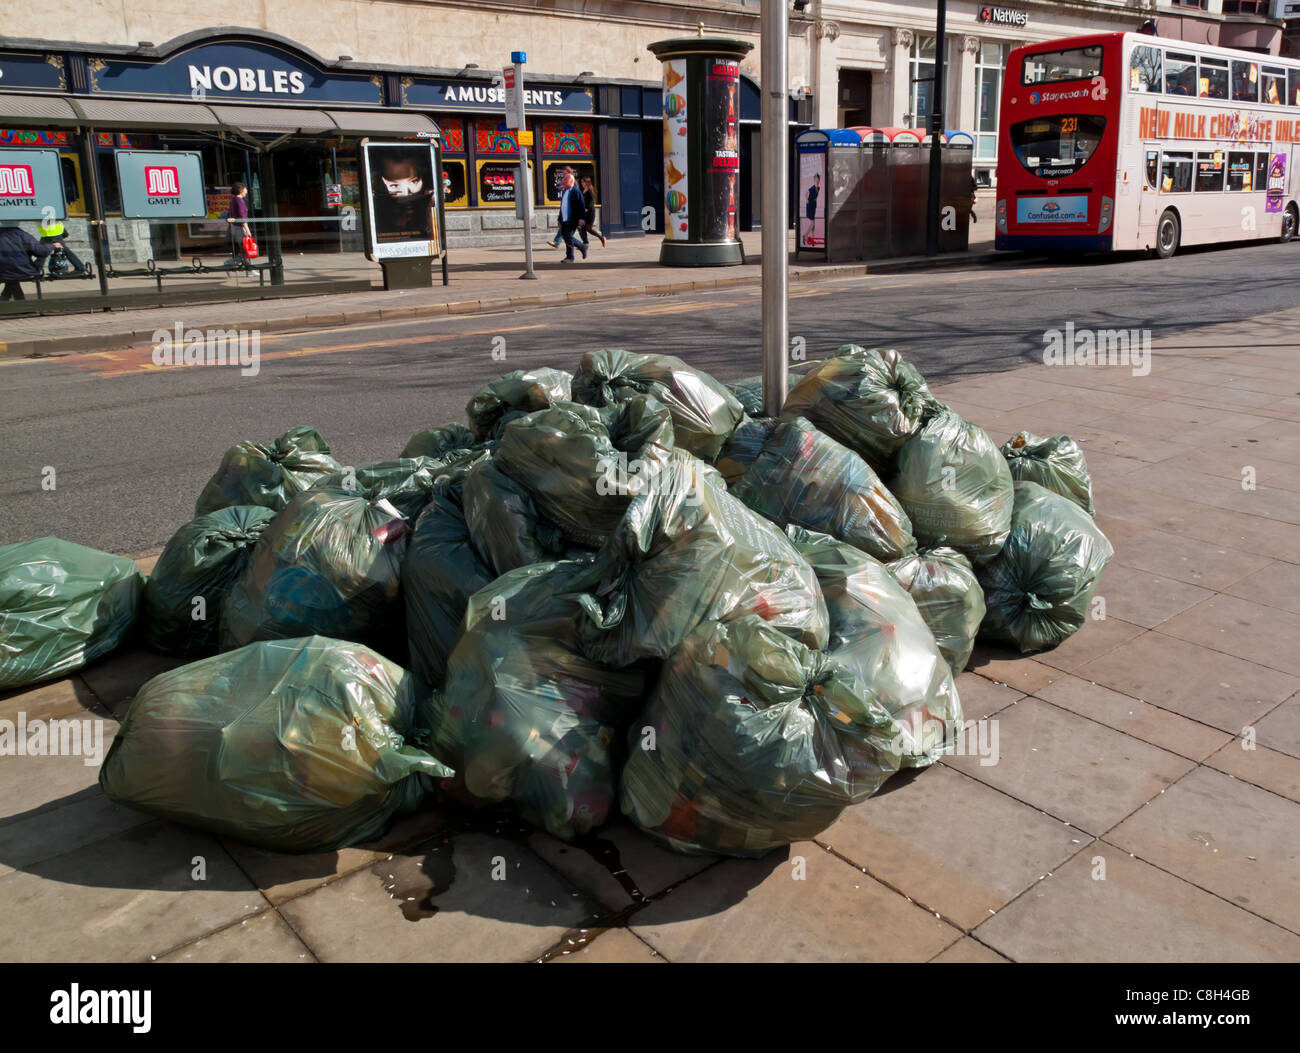 https://c8.alamy.com/comp/C8H4GB/sacks-of-rubbish-piled-up-on-the-street-in-plastic-bags-waiting-for-C8H4GB.jpg